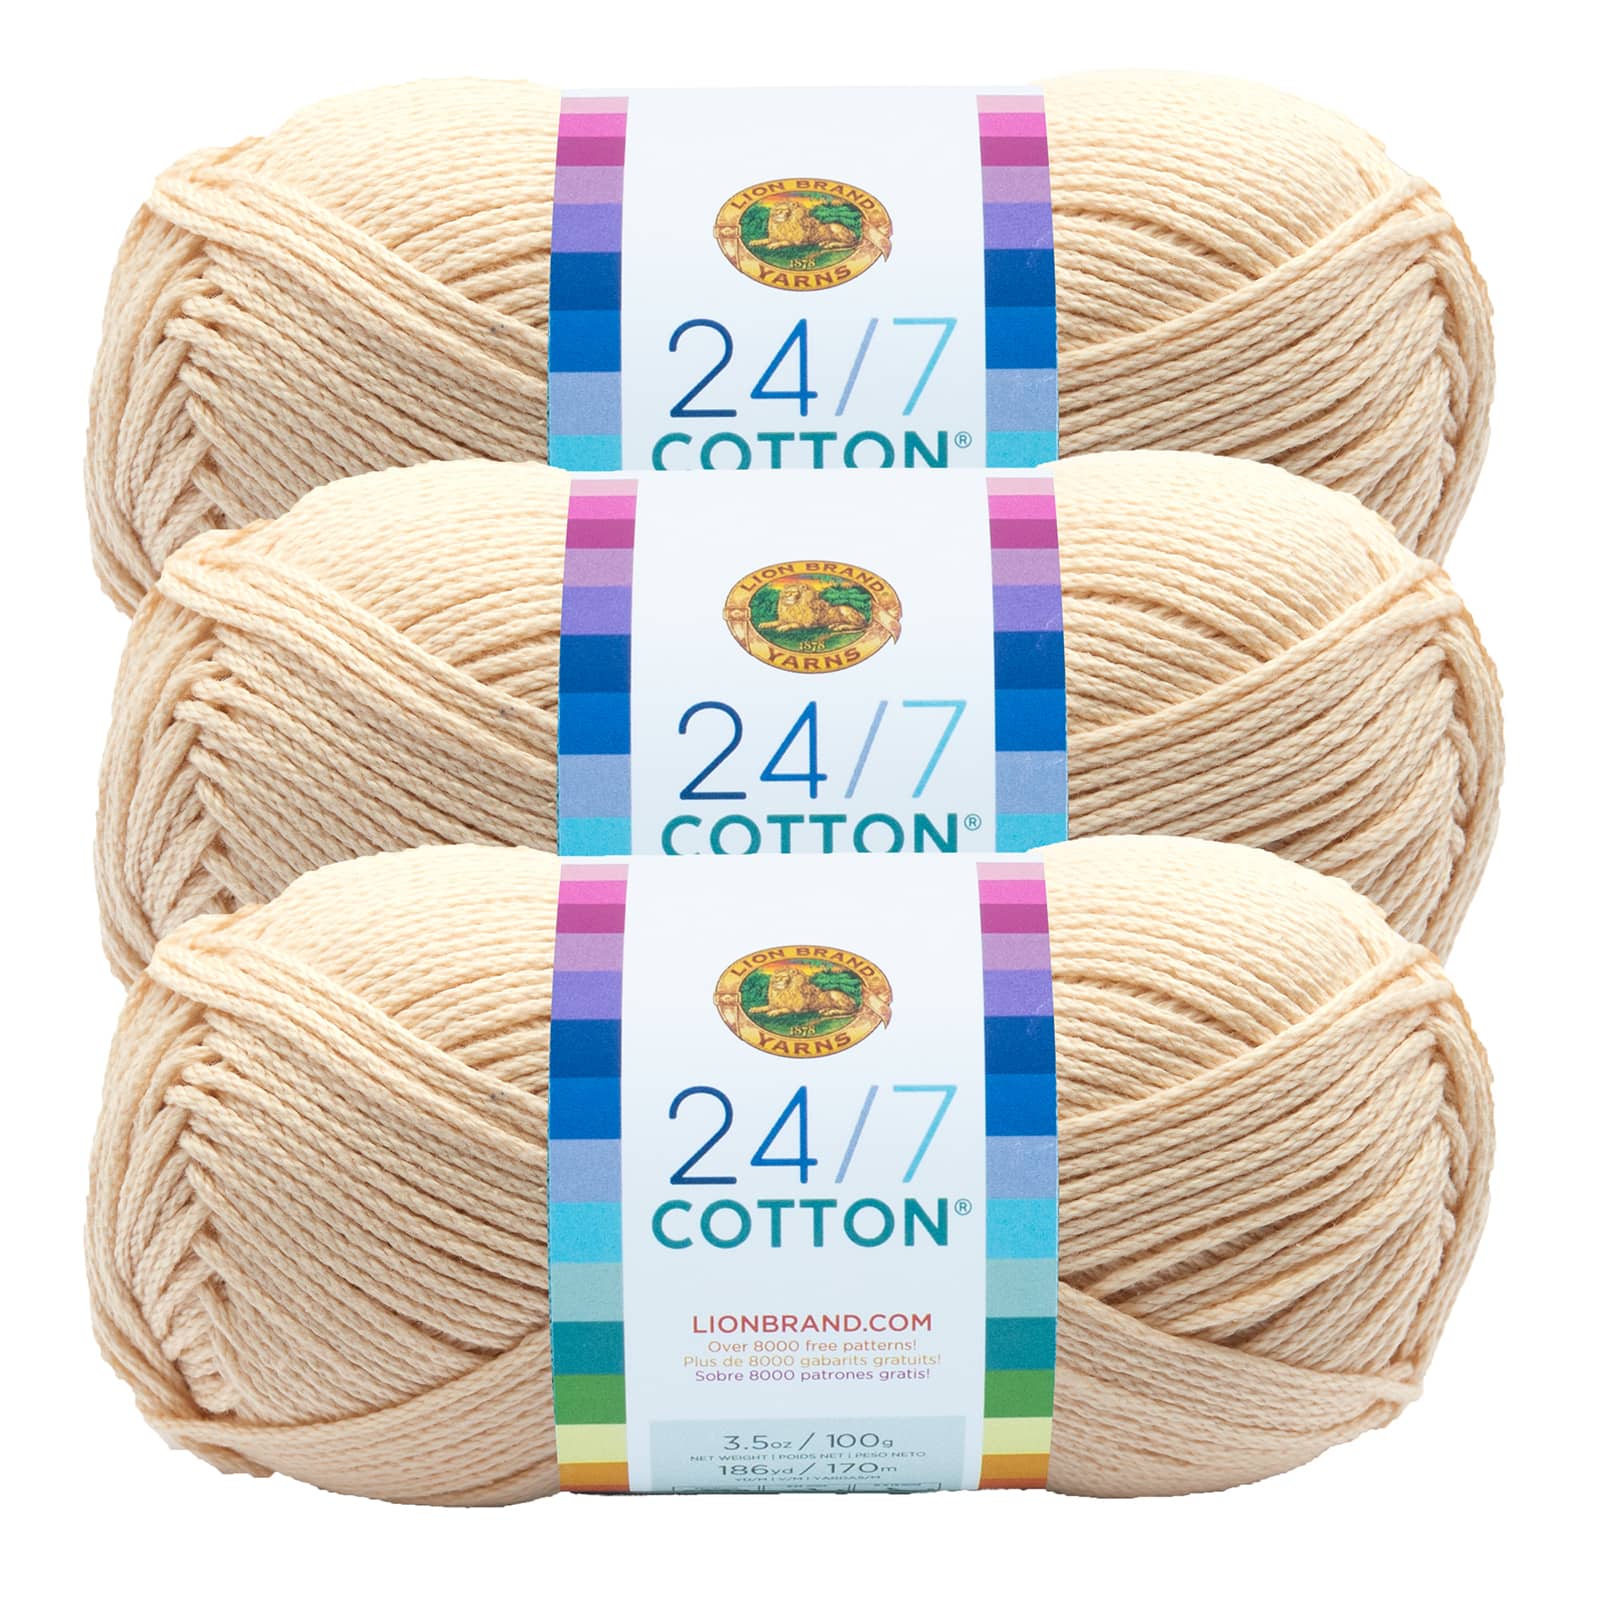 Lion Brand 24/7 Cotton Yarn-Lilac, 1 count - Fry's Food Stores